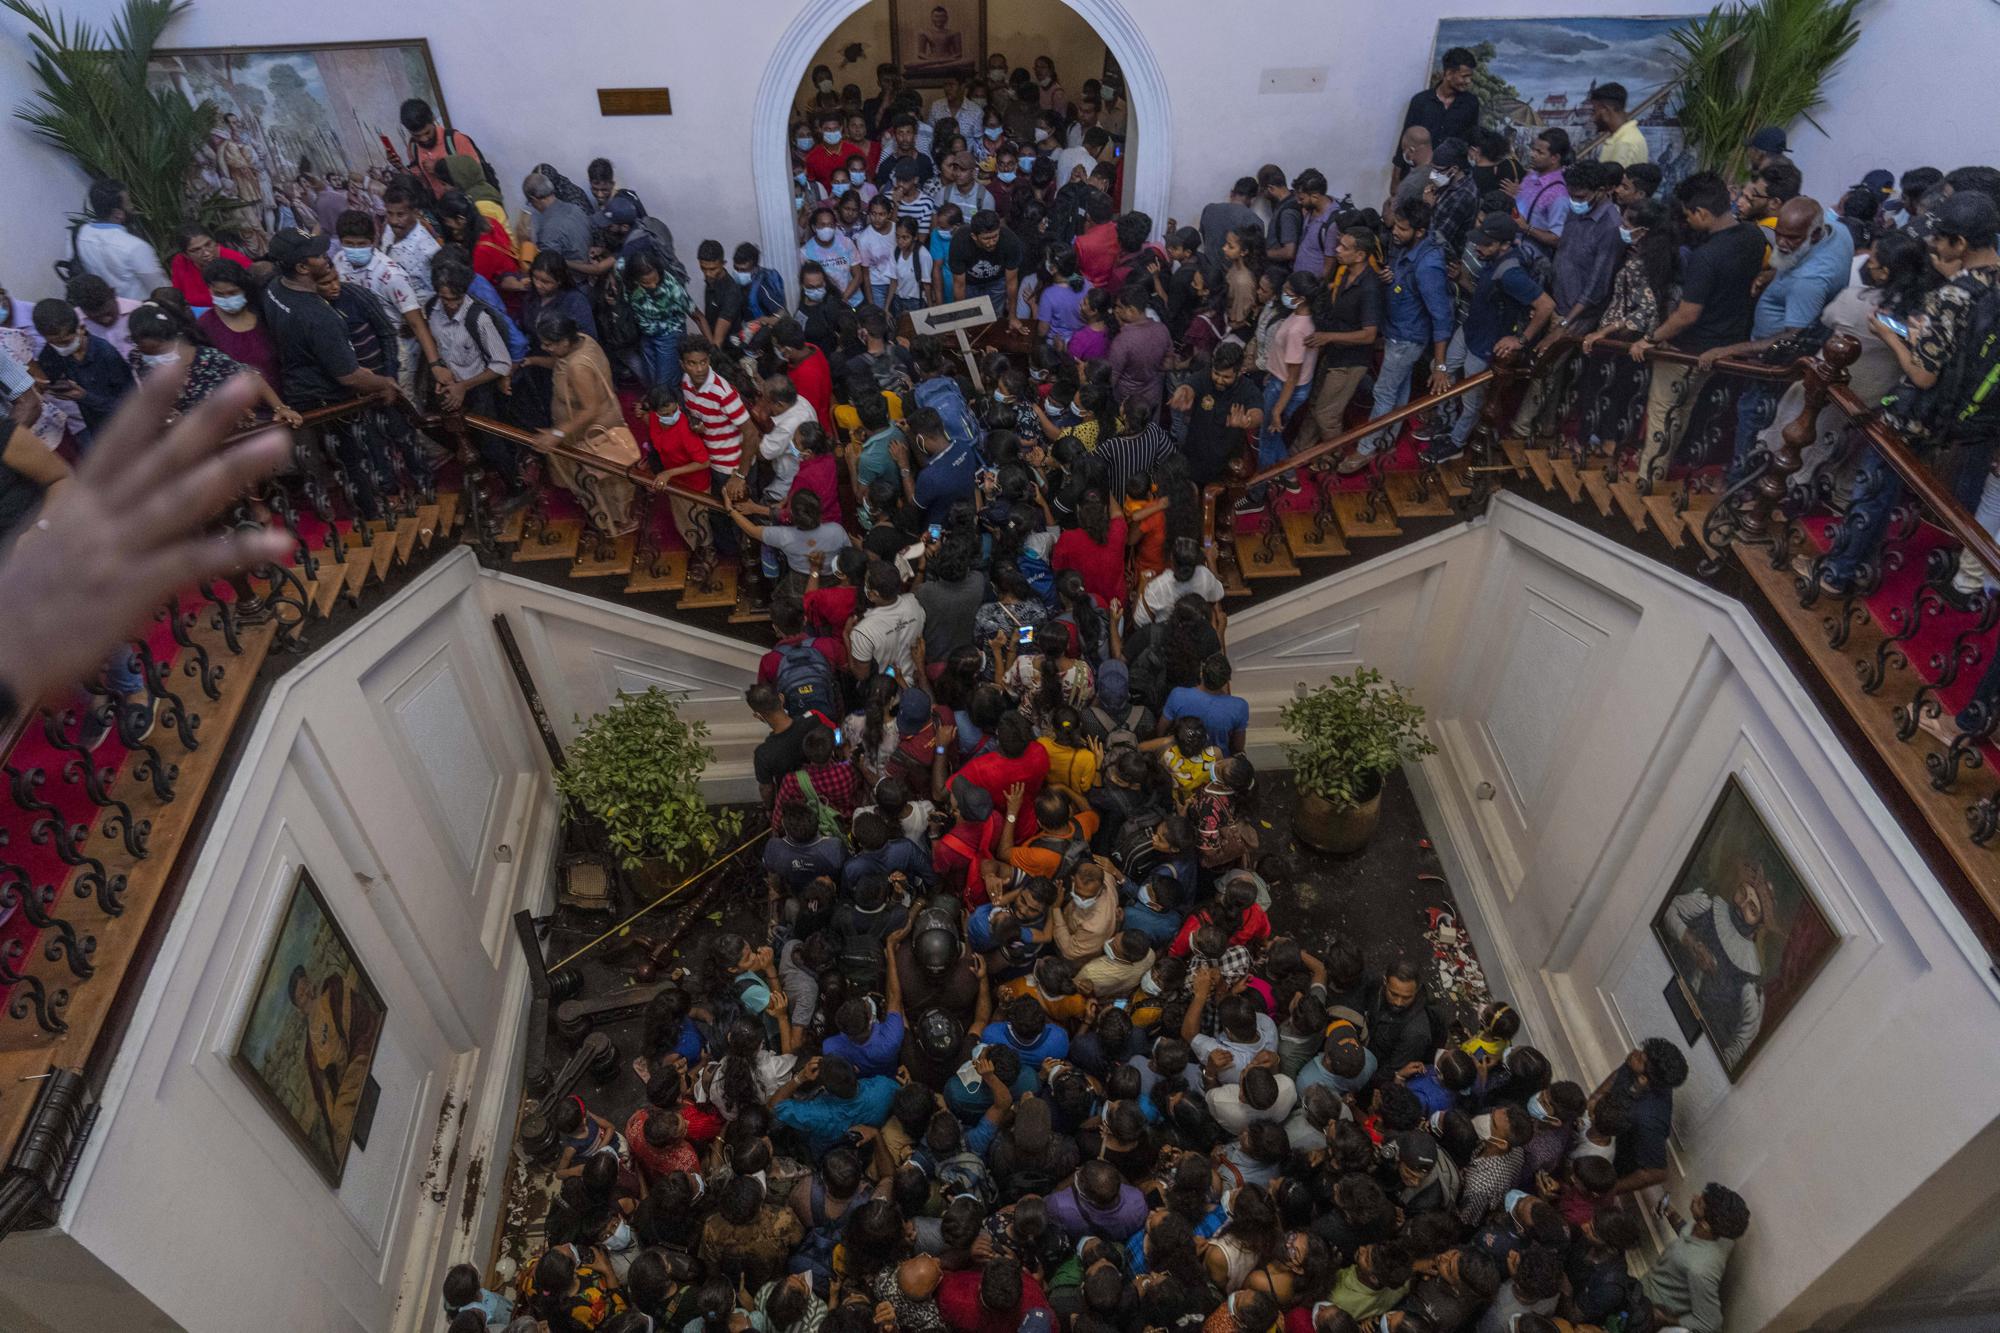 4. People throng President Gotabaya Rajapaksa's official residence in Colombo, Sri Lanka, on July 11, 2022, the day after it was stormed by protesters demanding his resignation amid the country's worst economic crisis in recent memory.